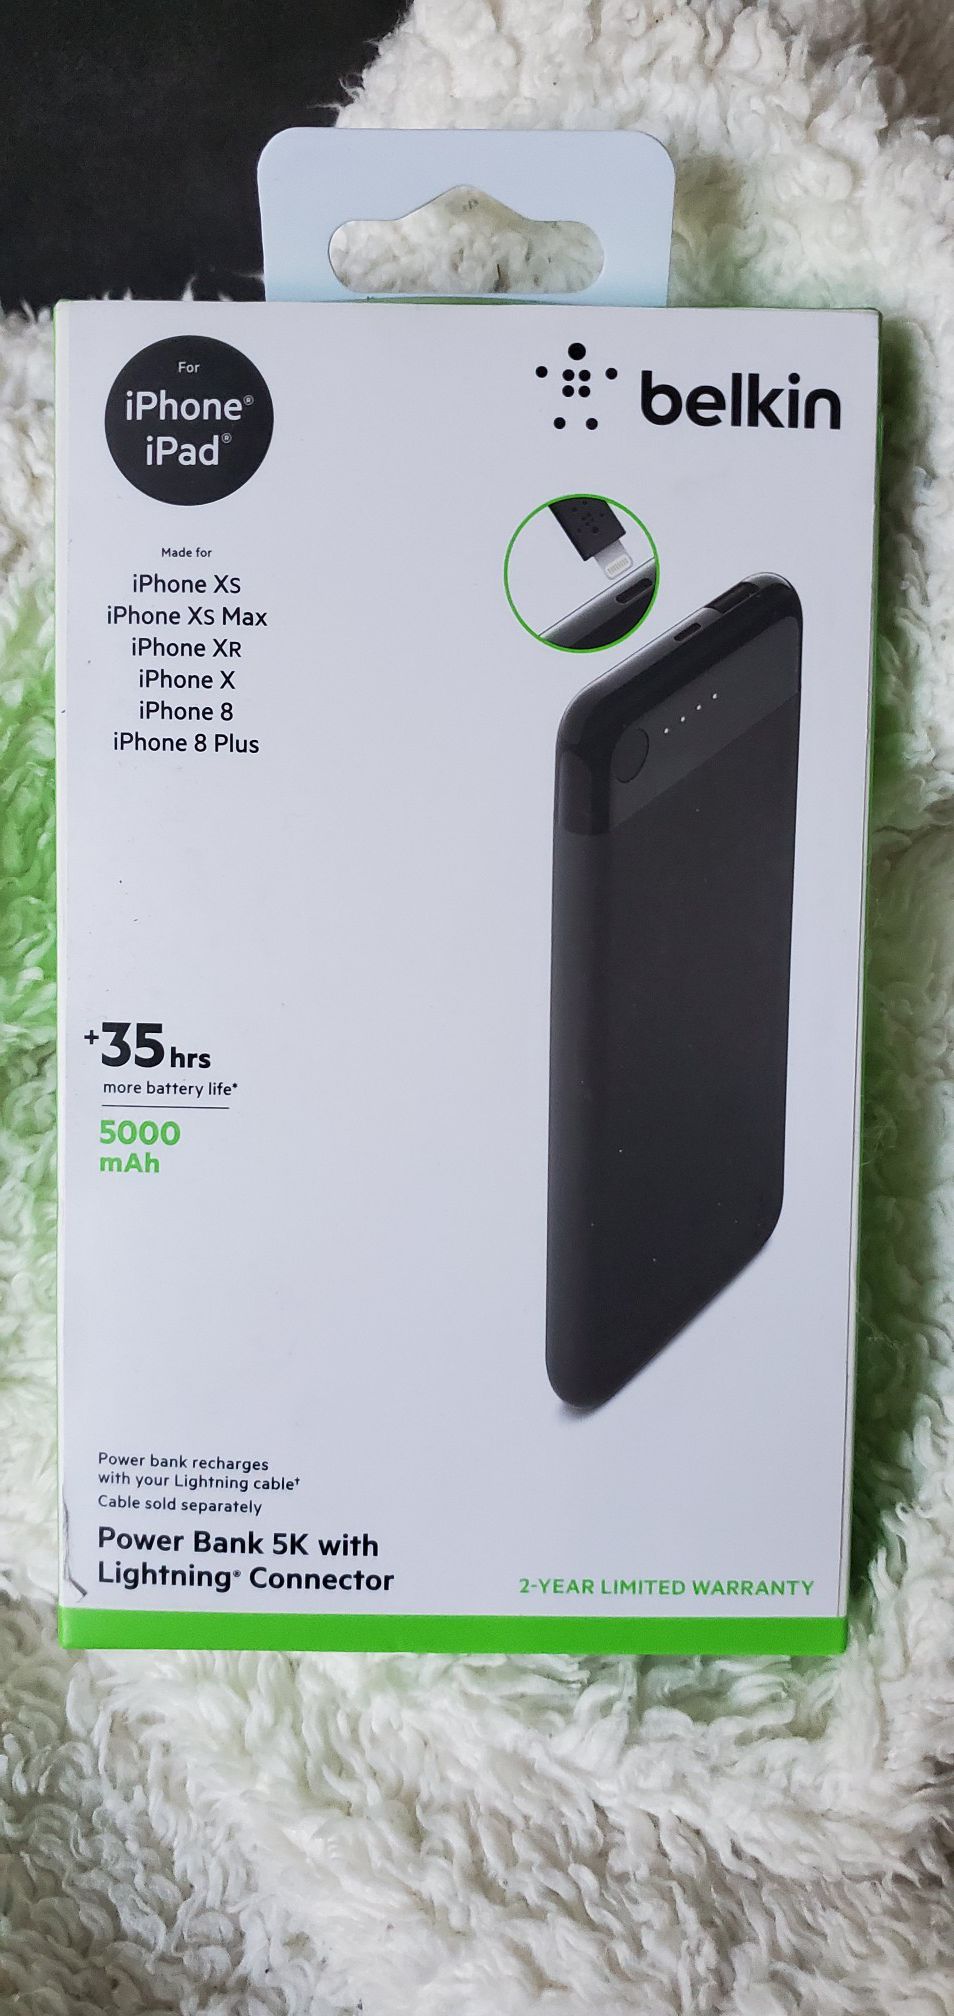 Belkin Power Bank 5K with Lightning Connector for iPhone & iPad